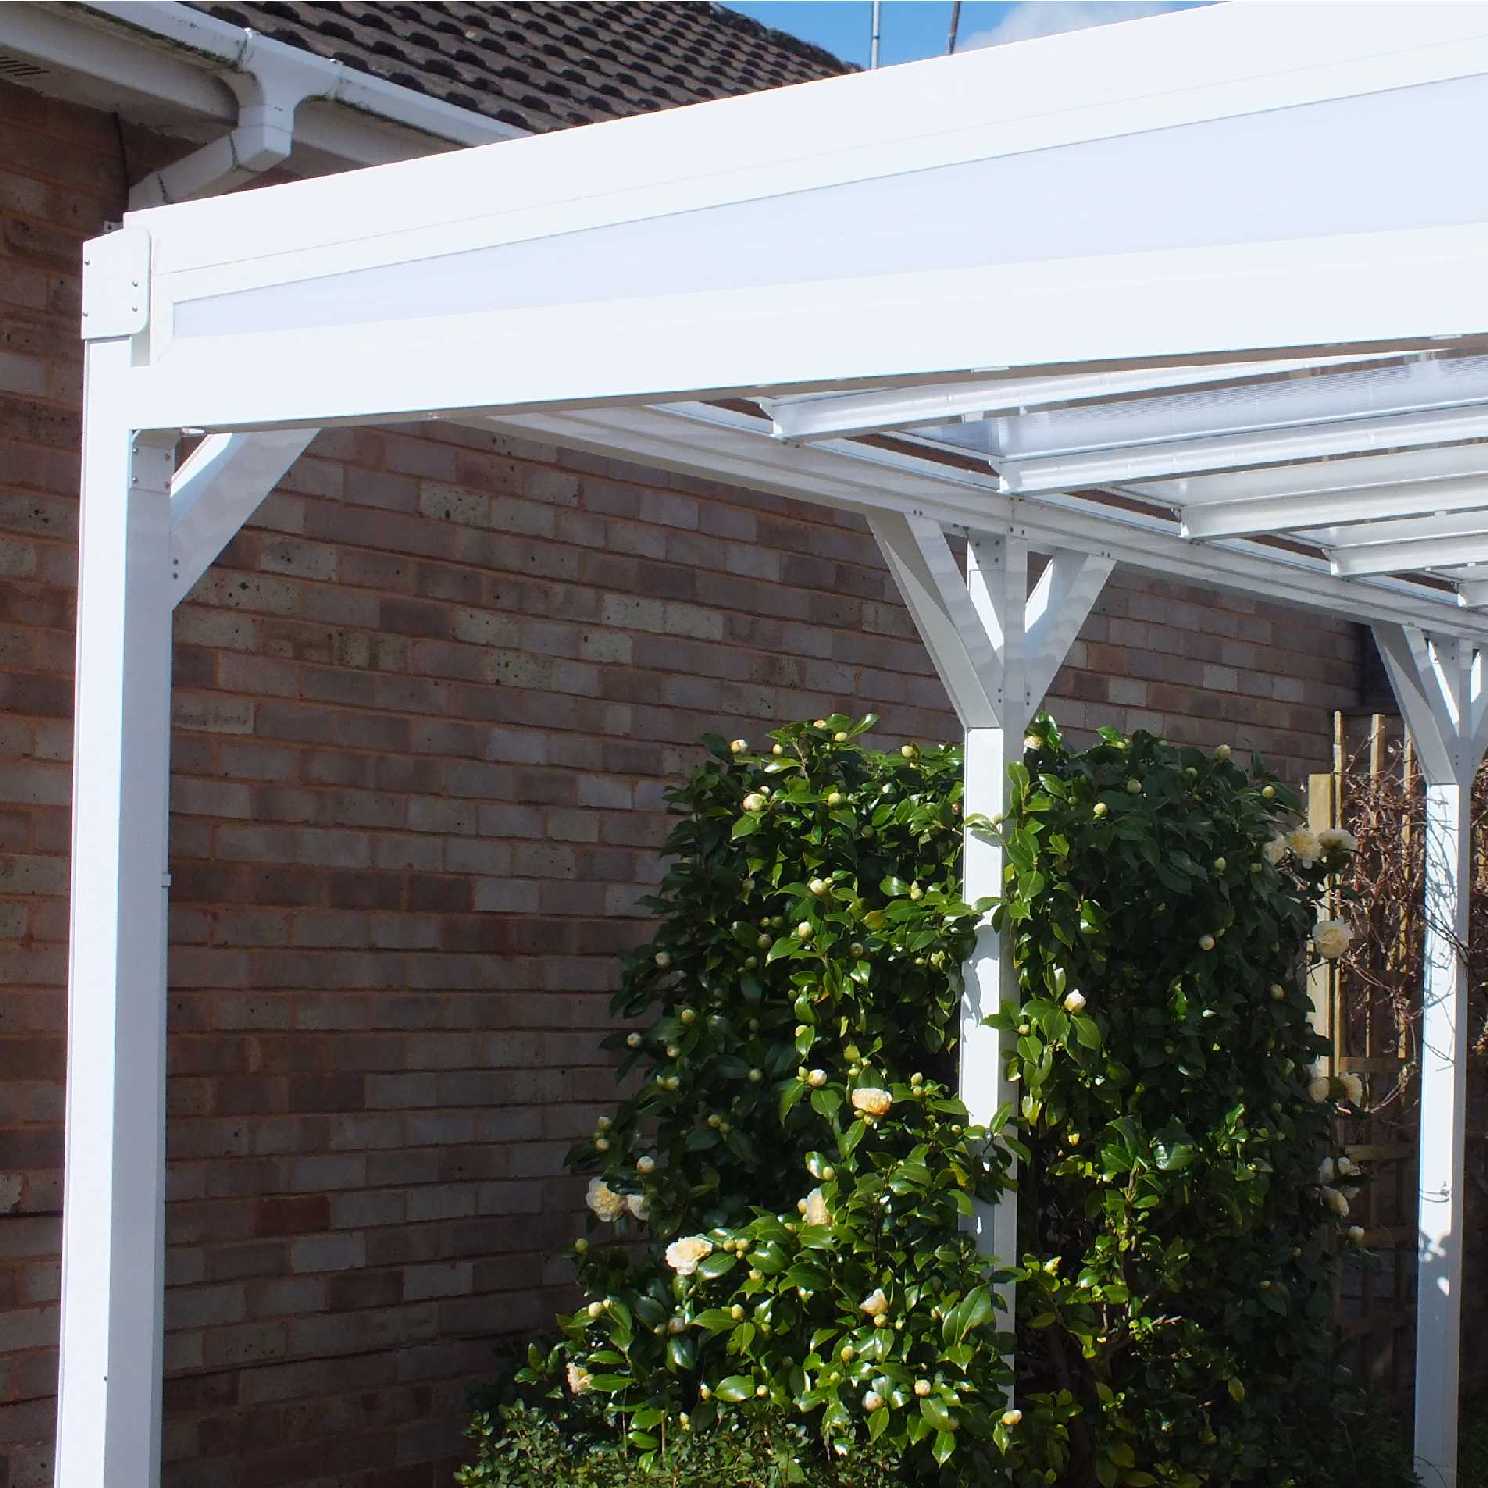 Omega Smart Lean-To Canopy, White with 16mm Polycarbonate Glazing - 7.0m (W) x 4.5m (P), (4) Supporting Posts from Omega Build